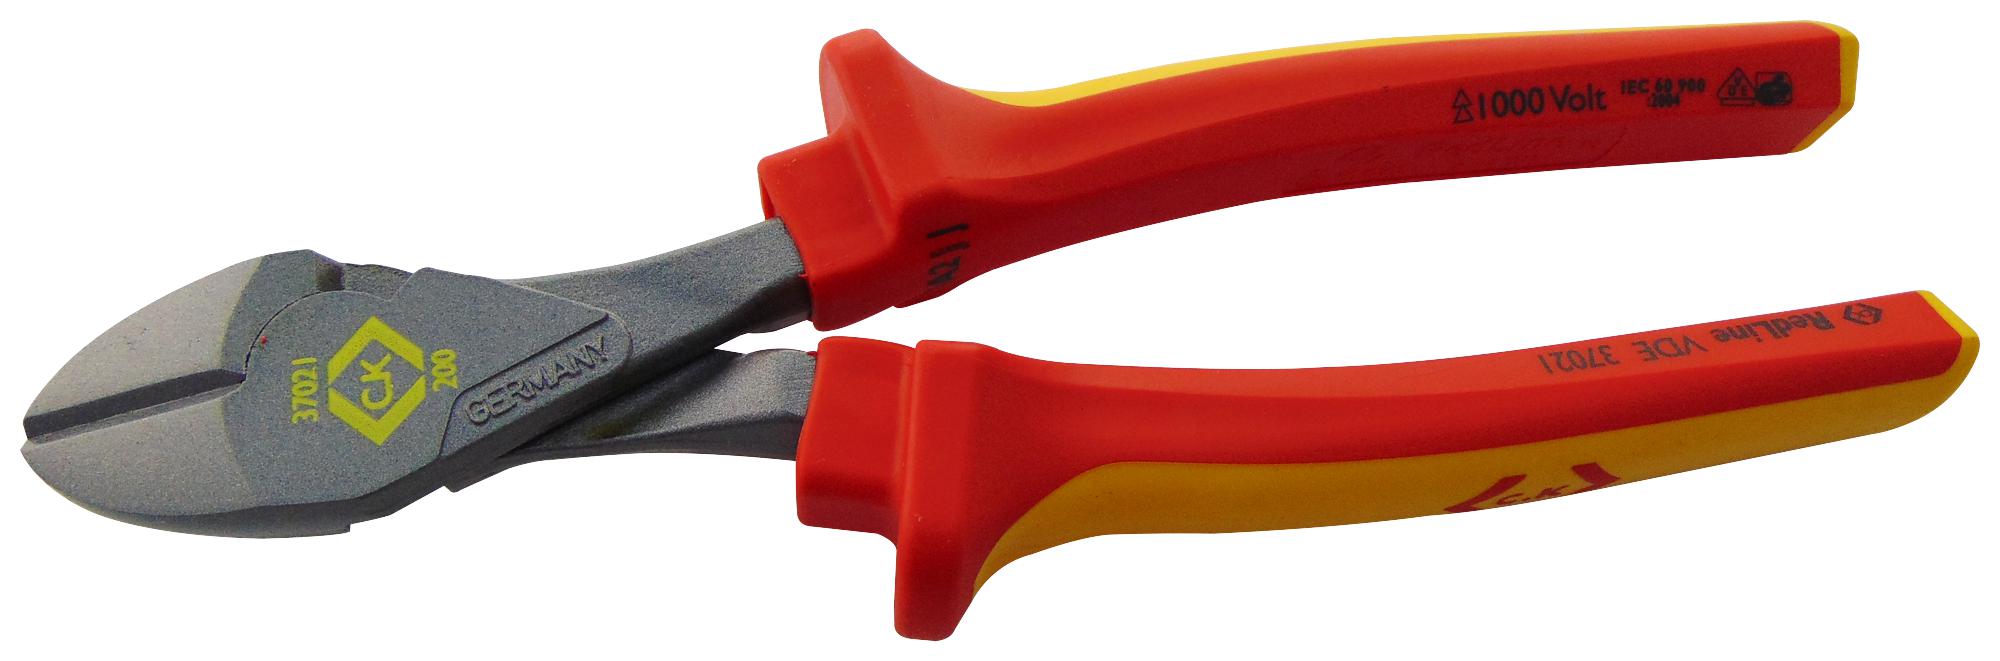 T37021 180 SIDE CUTTER, 2.2MM, 180MM CK TOOLS